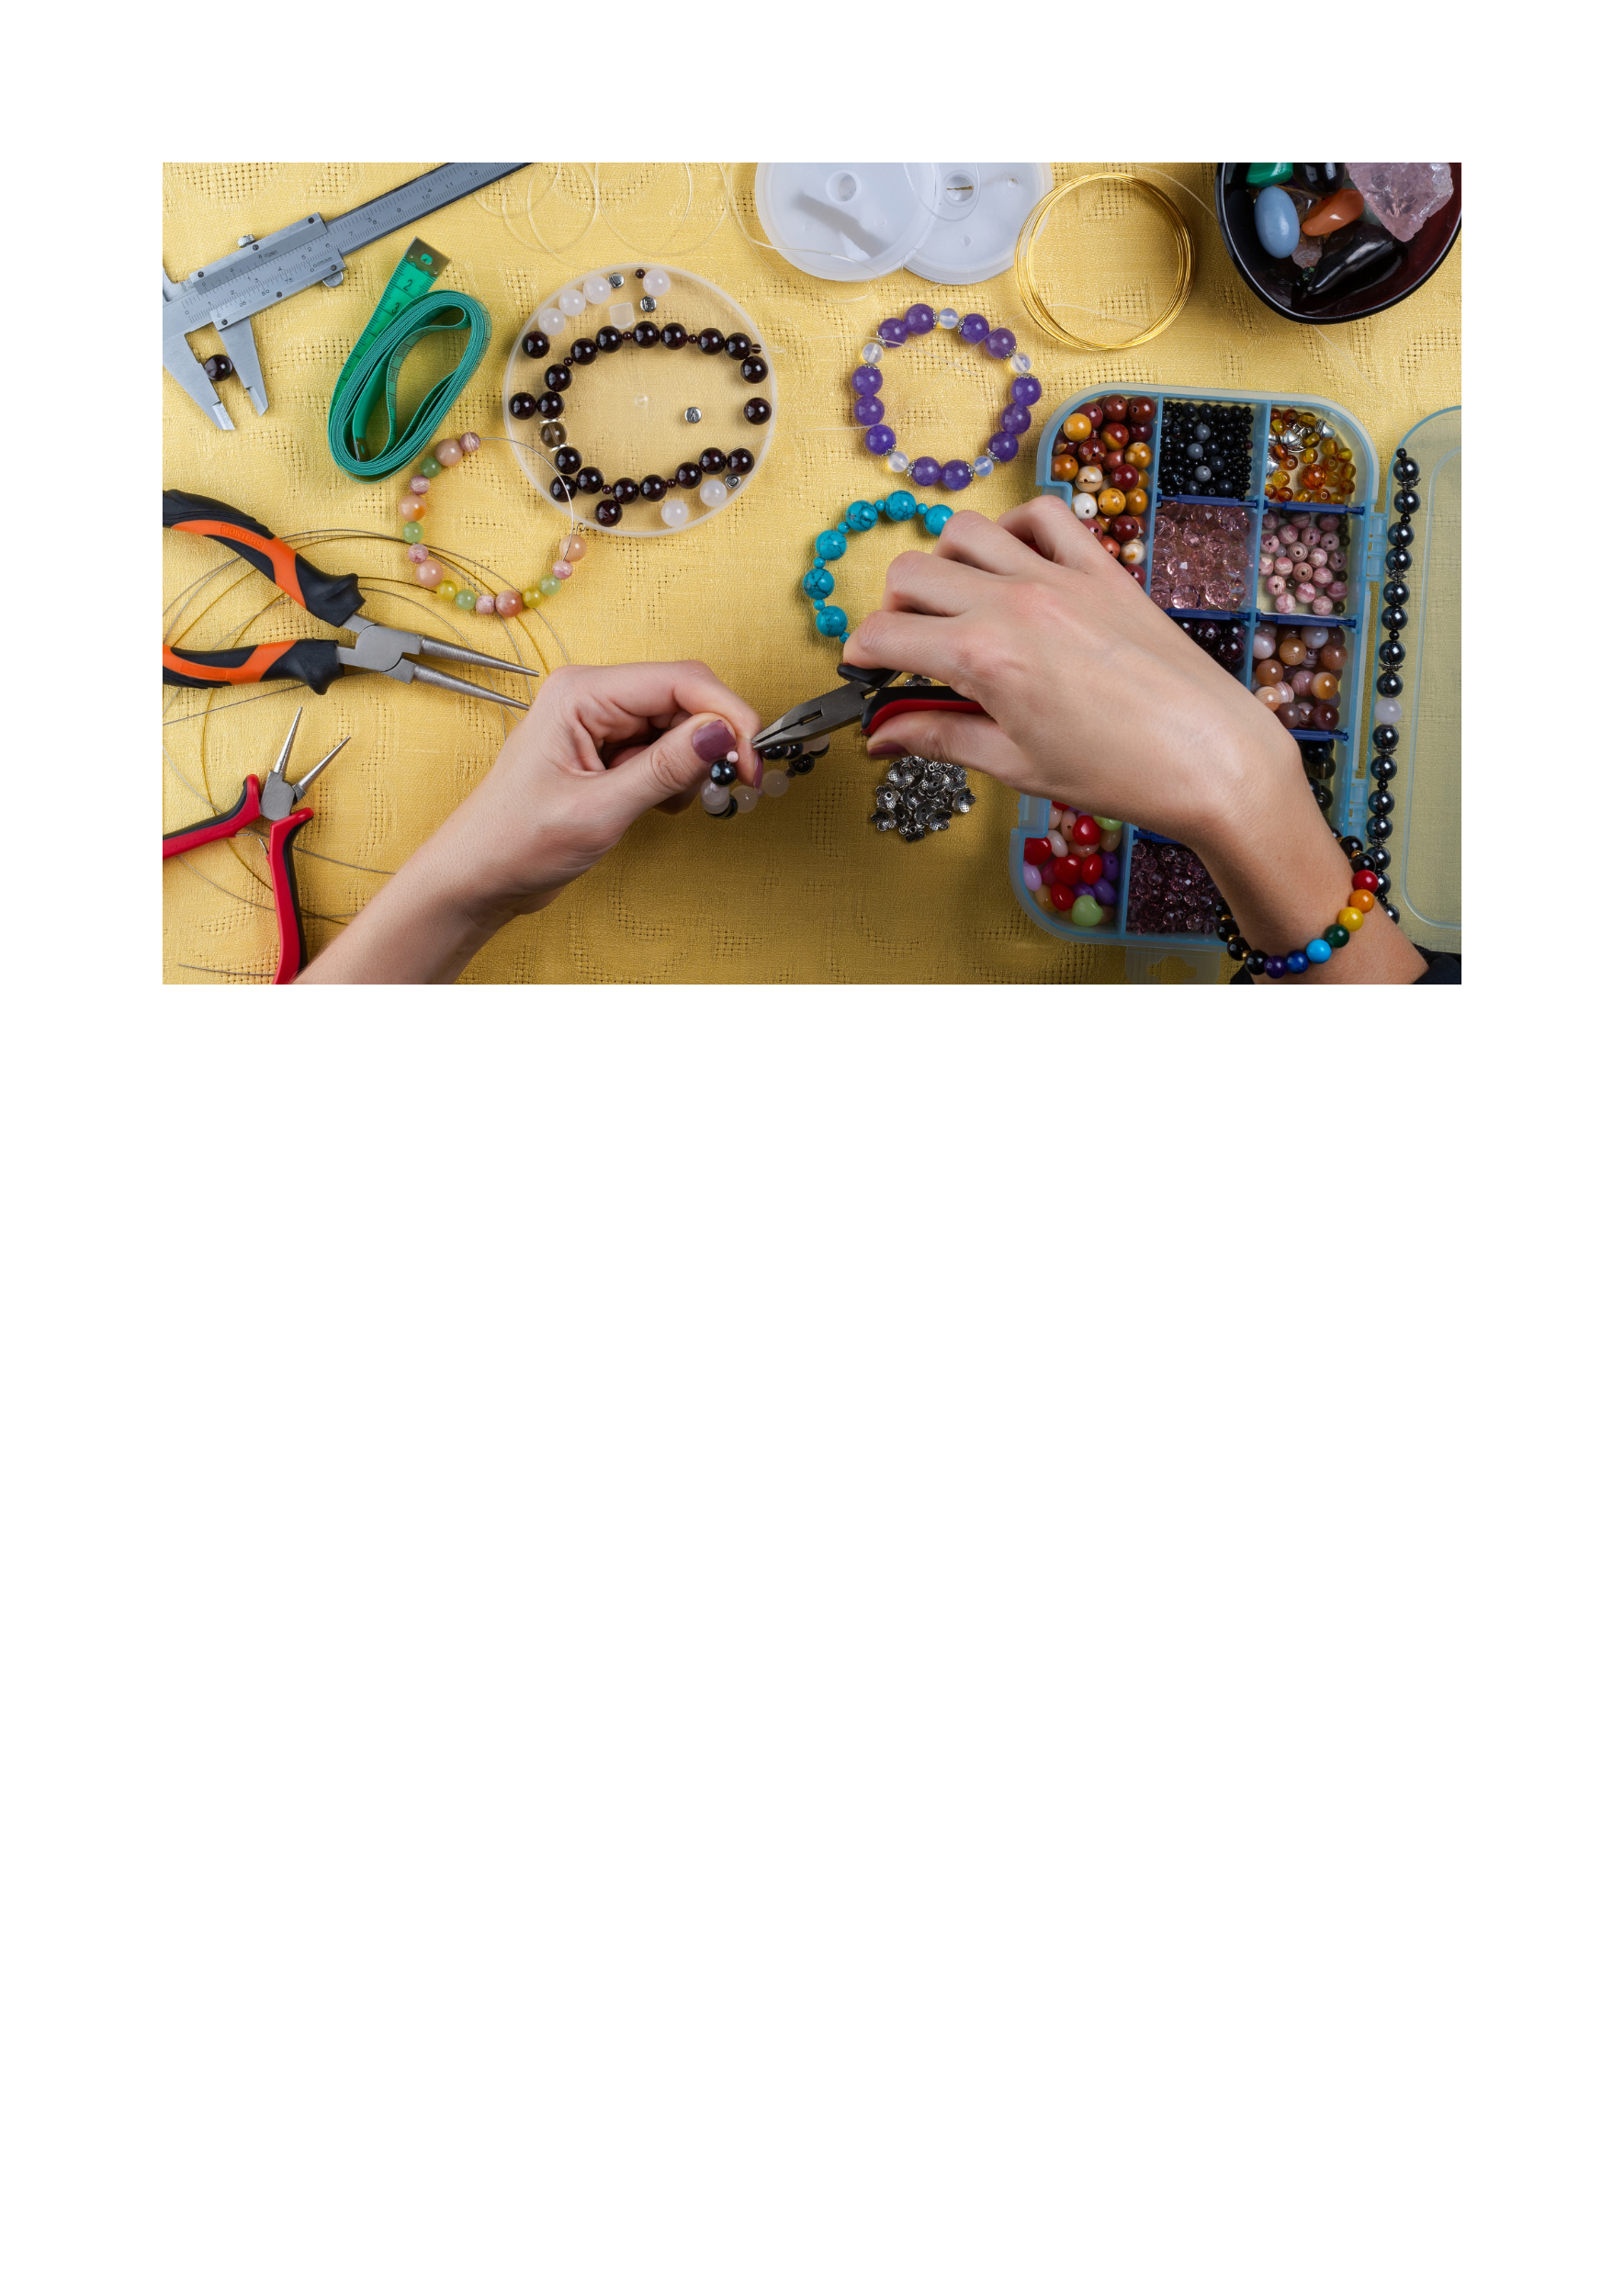 Person designing jewelry using beads and jewelry tool